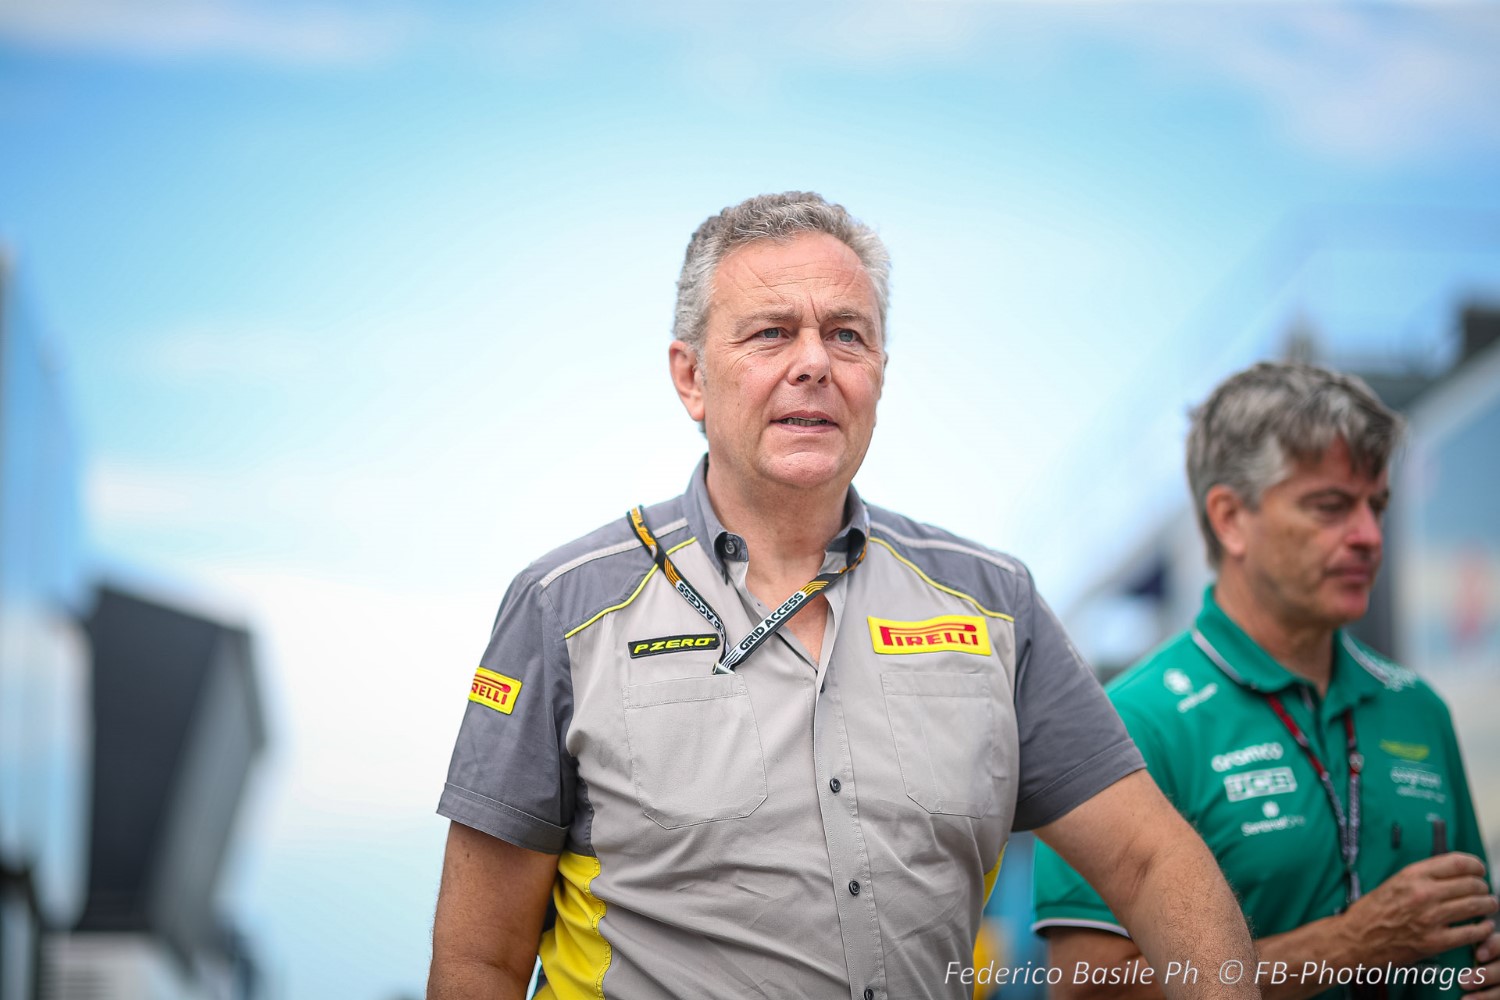 Mario Isola, Pirelli technical director , during the Hungarian GP, Budapest 20-23 July 2023 at the Hungaroring, Formula 1 World championship 2023.